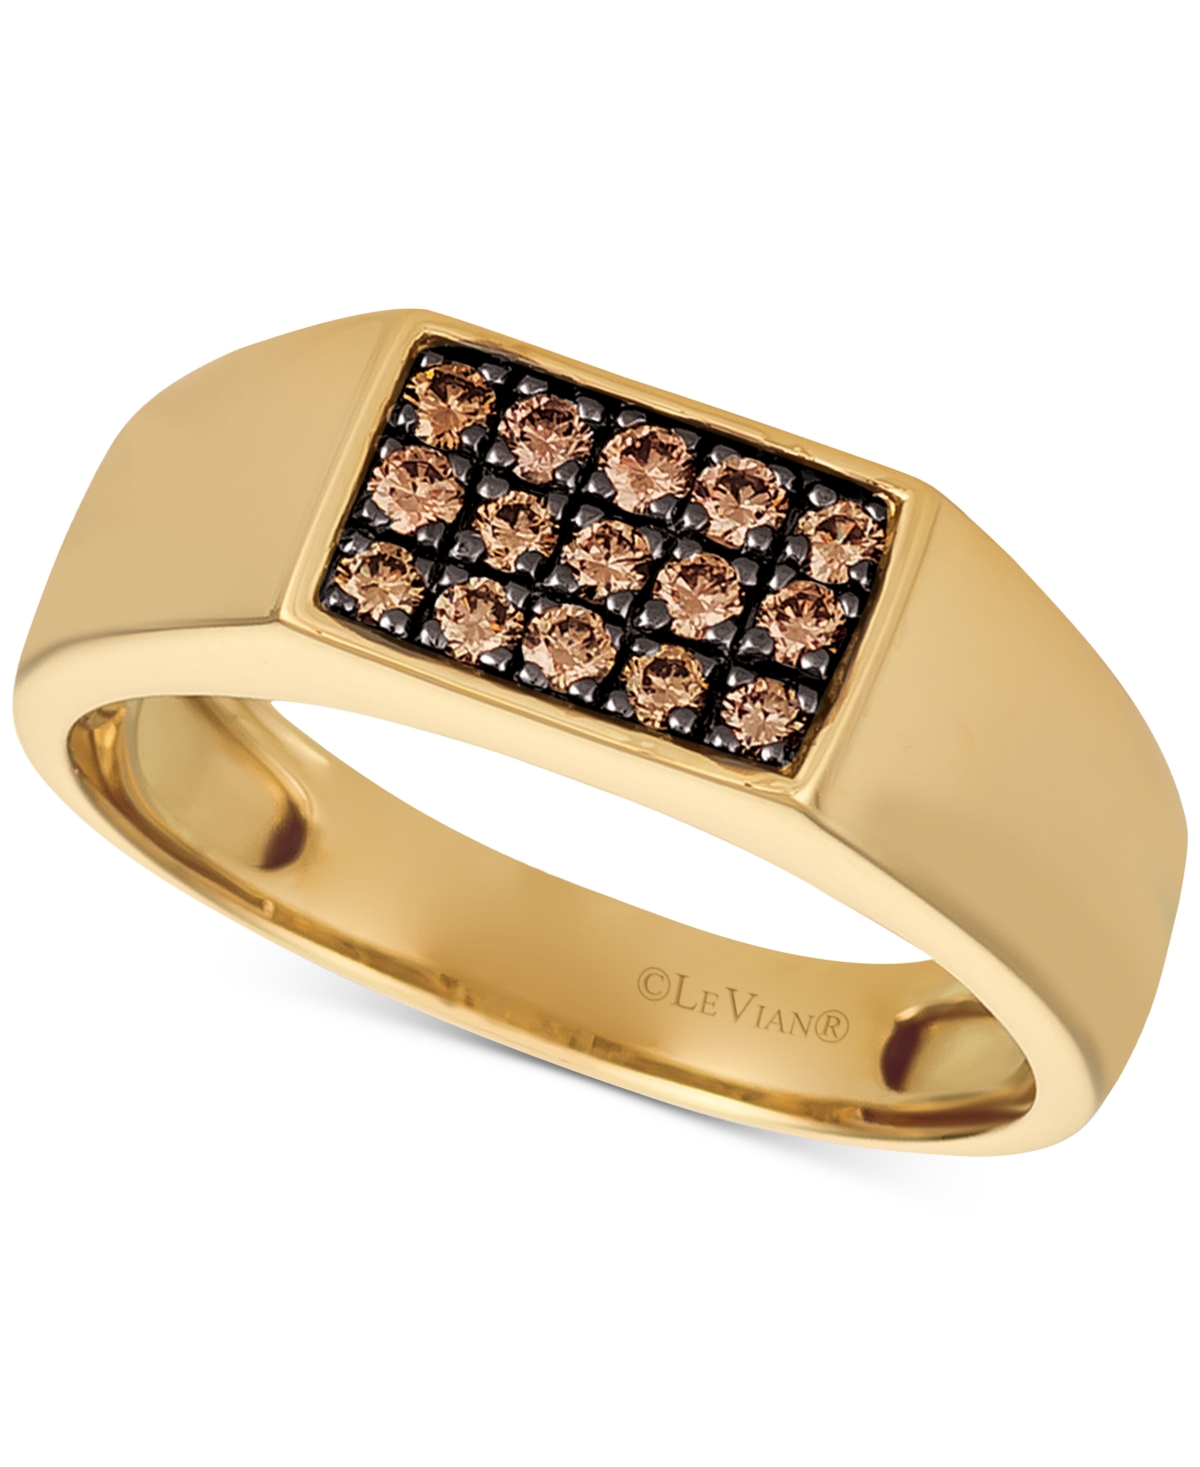 Gents Mens Diamond Ring (3/8 ct. t.w.) in 14k Gold - Yellow Gold